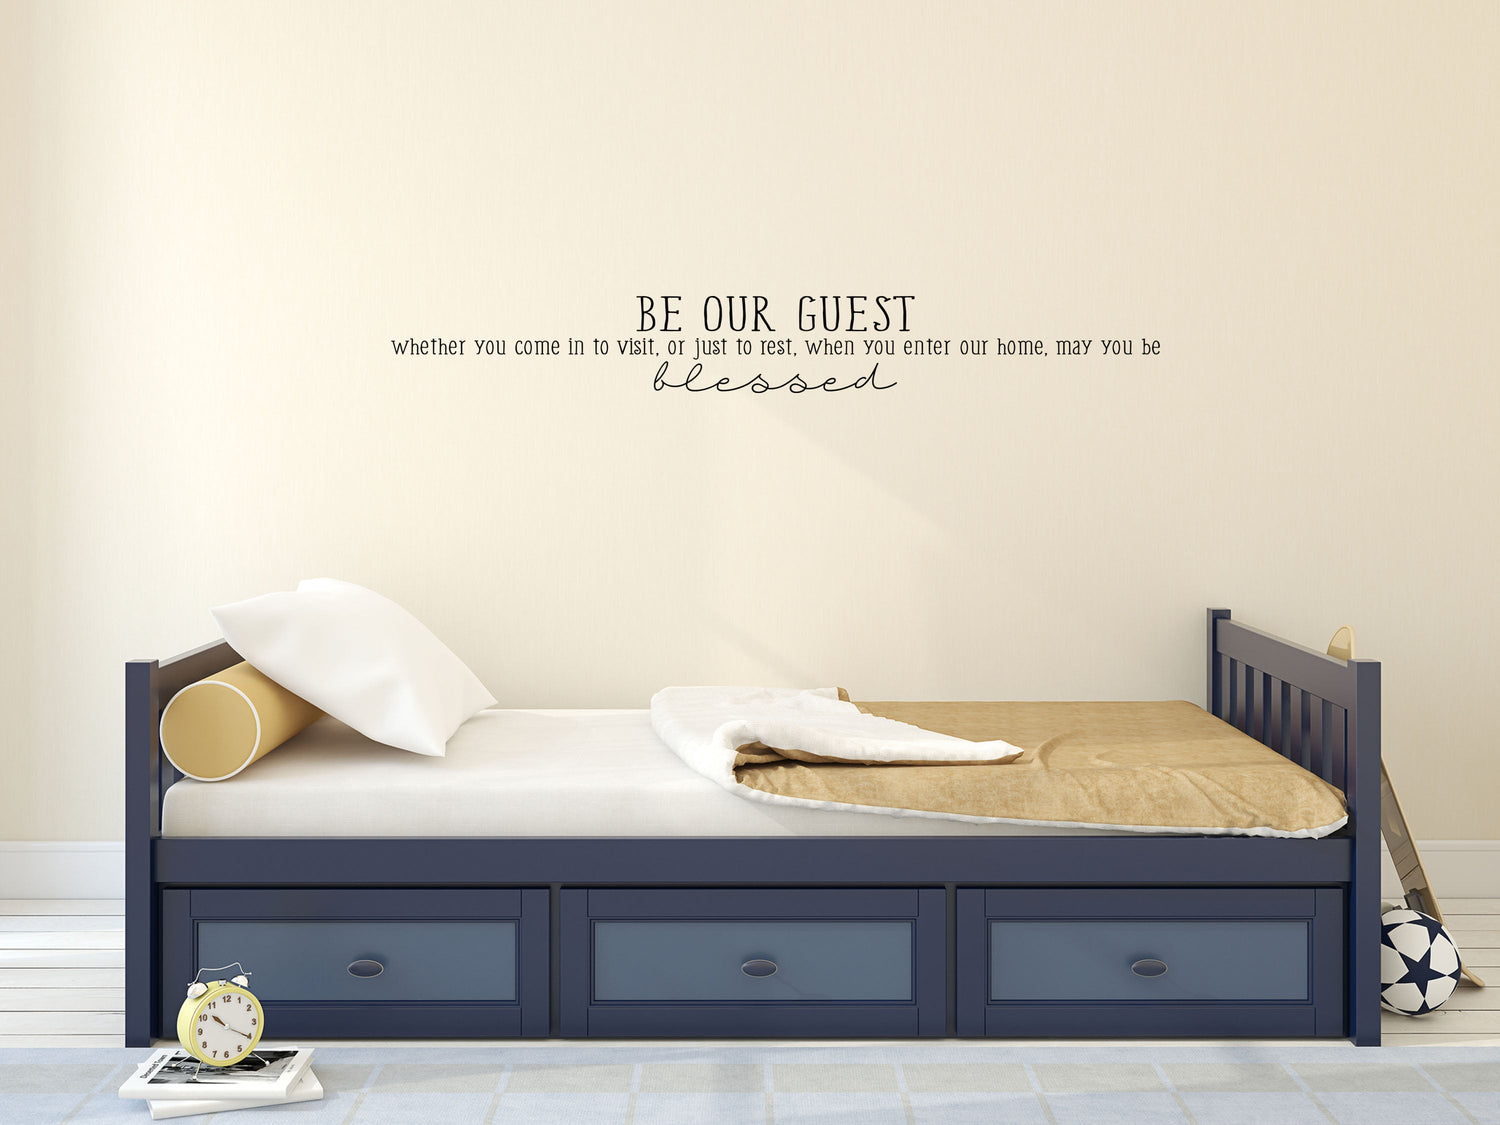 Be Our Guest - Guest Room Decor - Guest Room Wall Decal - Be Our Guest Home Decor - May You Be Blessed Wall Art Vinyl Wall Decal Inspirational Wall Signs 